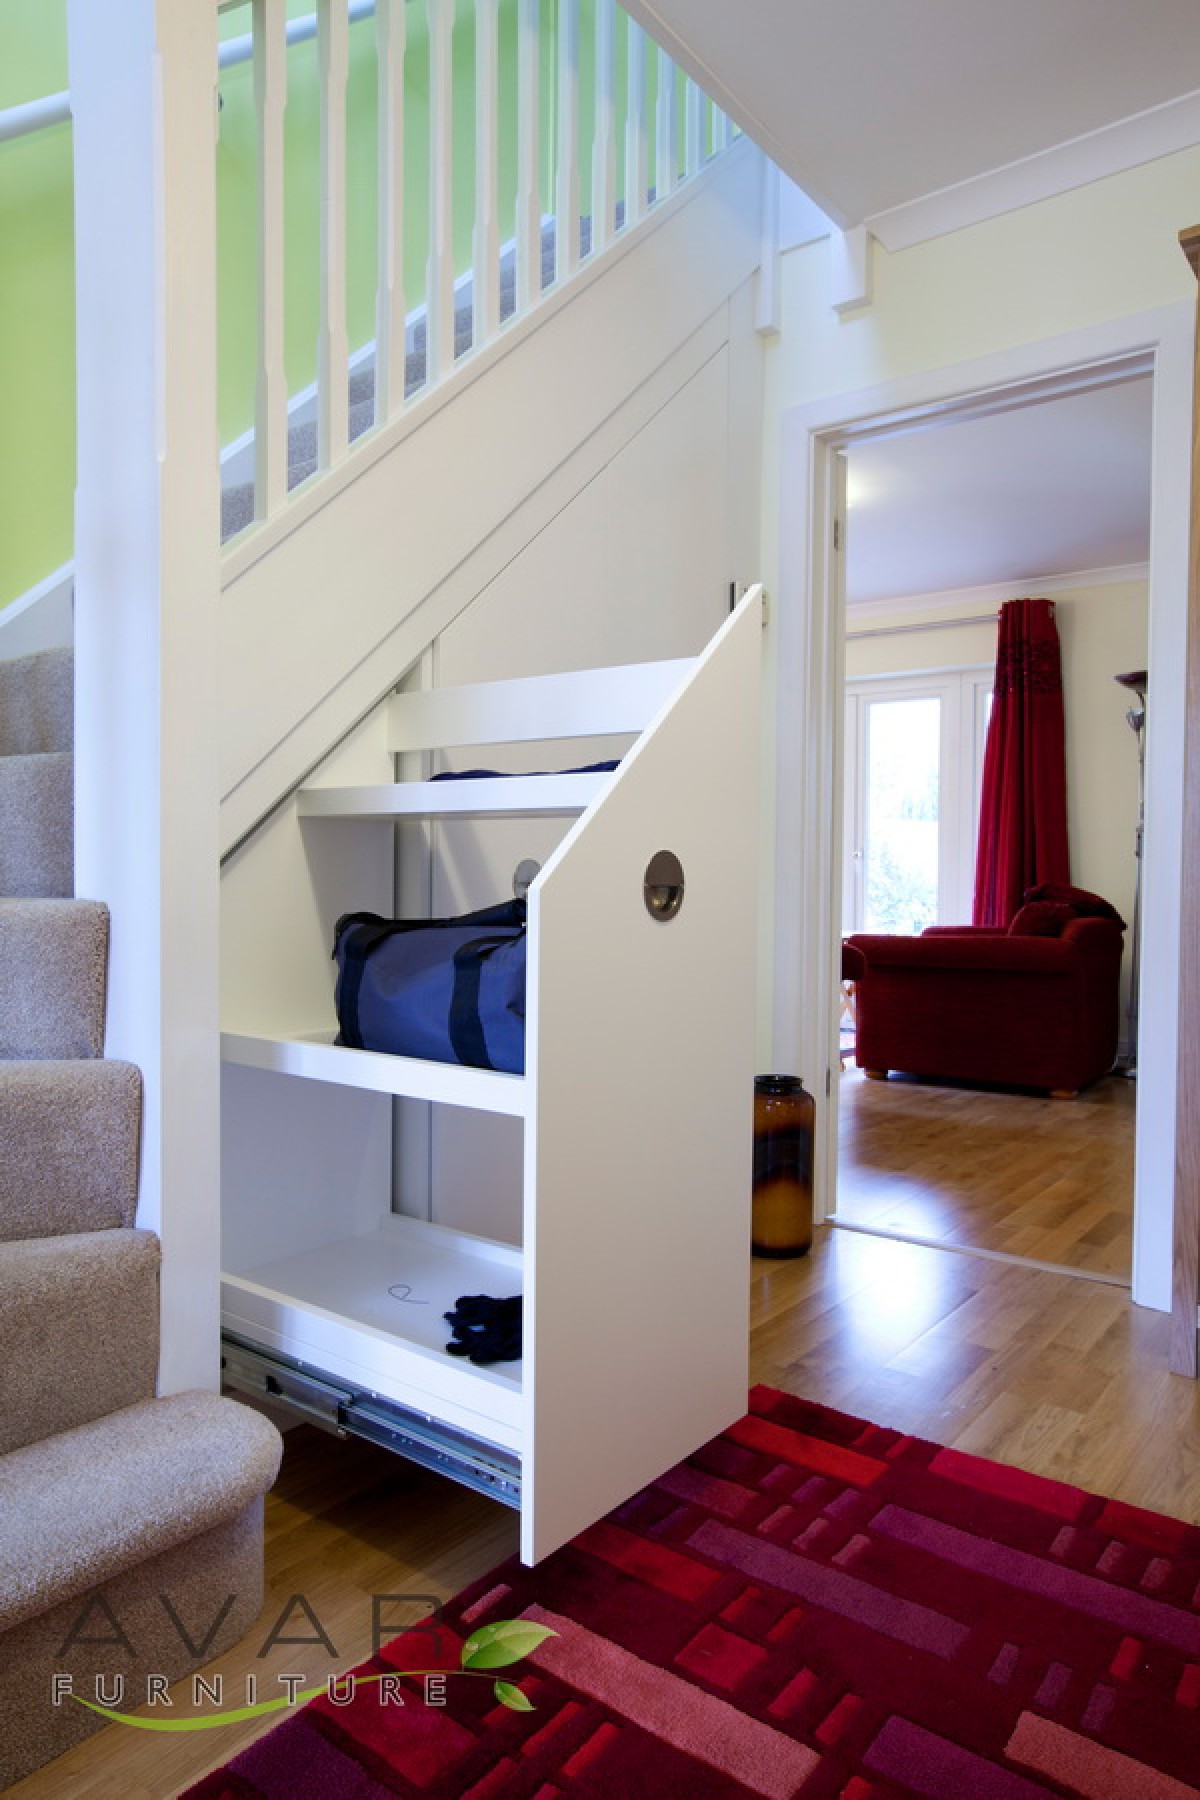 https://www.avarfurniture.co.uk/images/gallery/194/04-under-stair-storage-ideas-fully-opened-unit-gallery-5.jpg